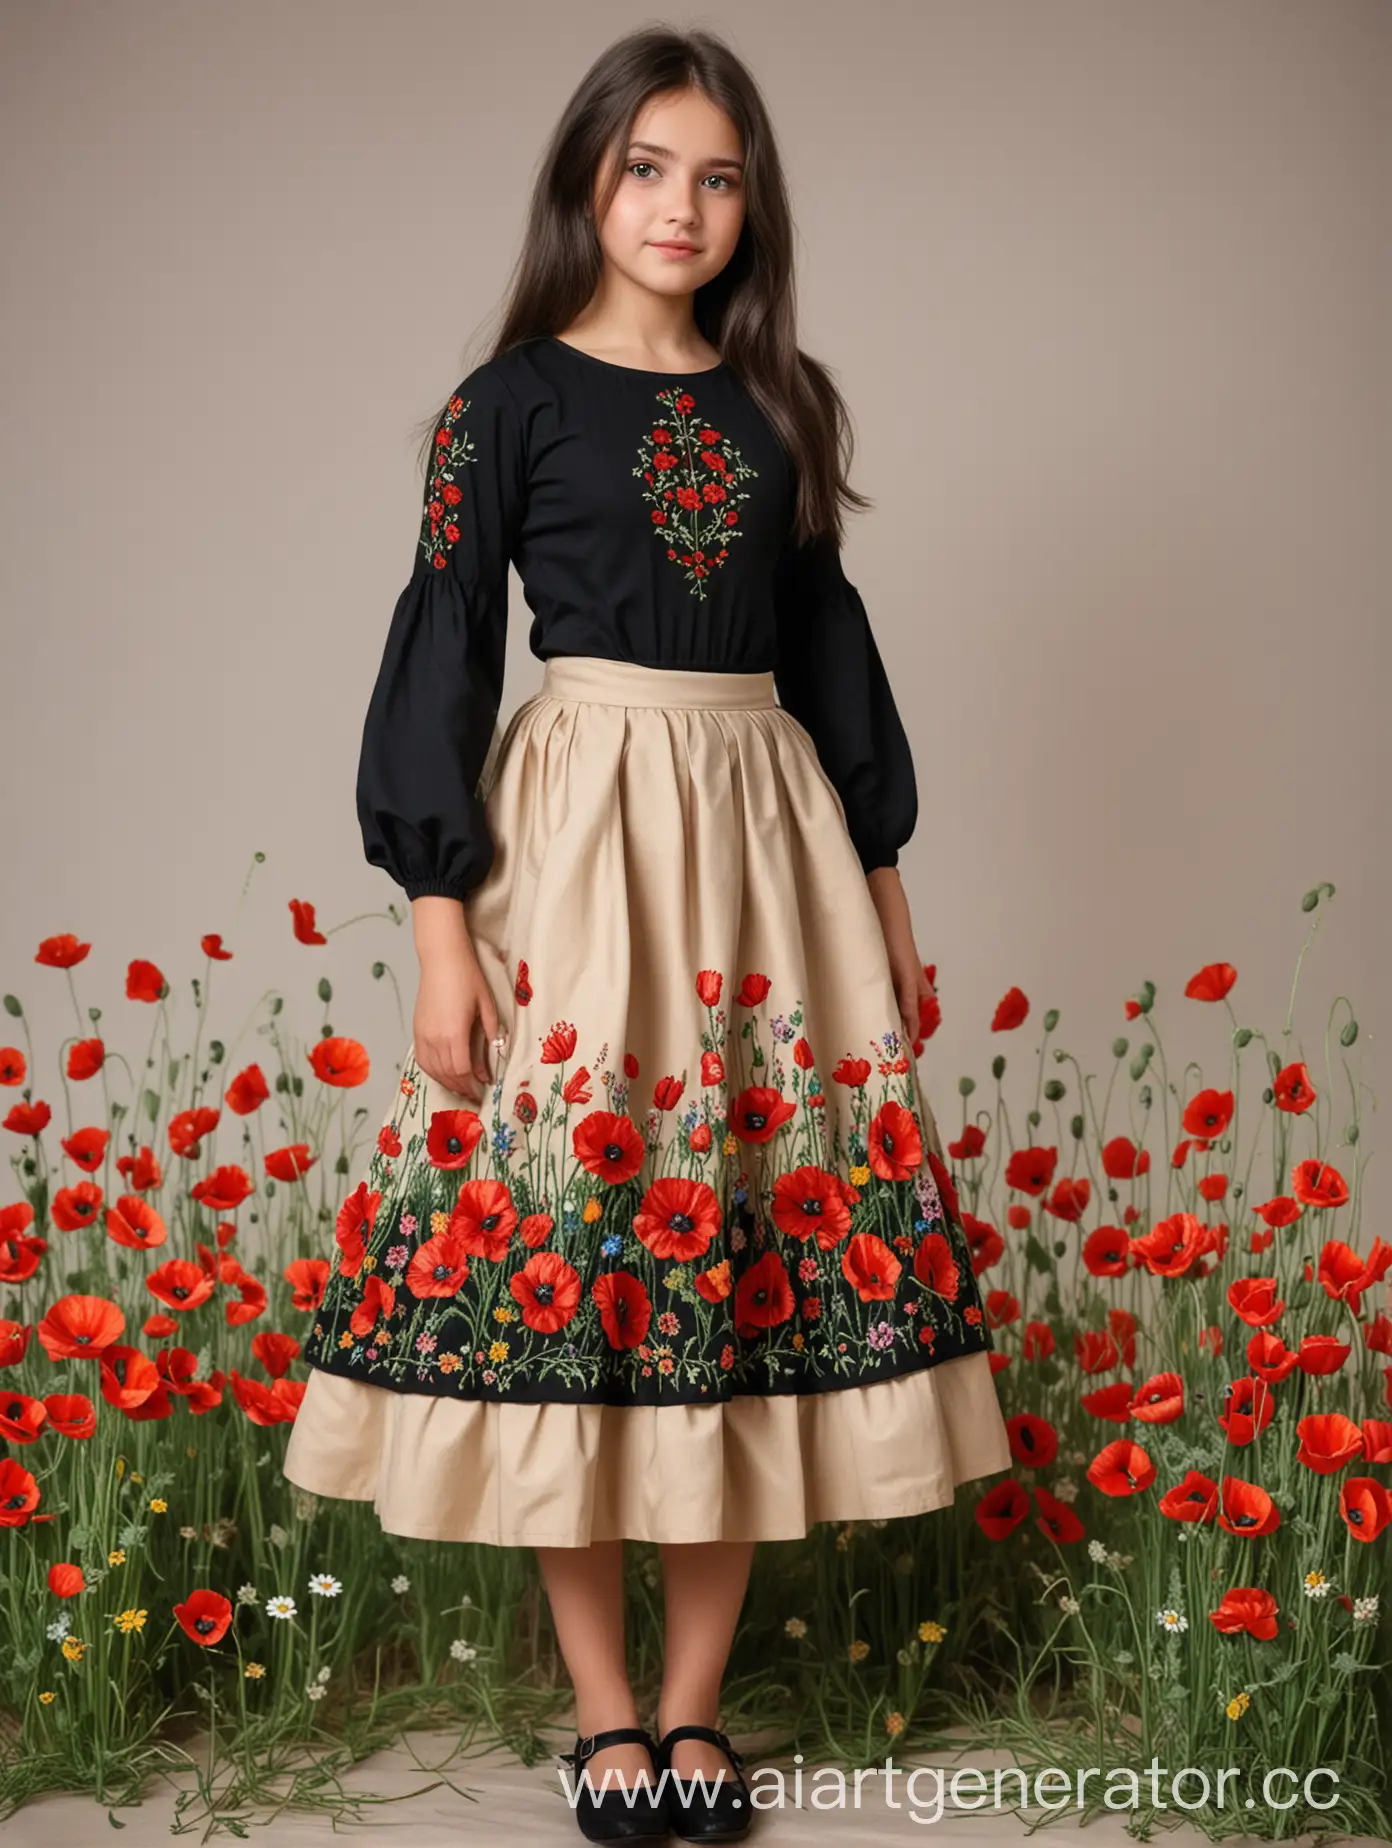 DarkHaired-Russian-Girl-in-Floral-Top-and-BellShaped-Skirt